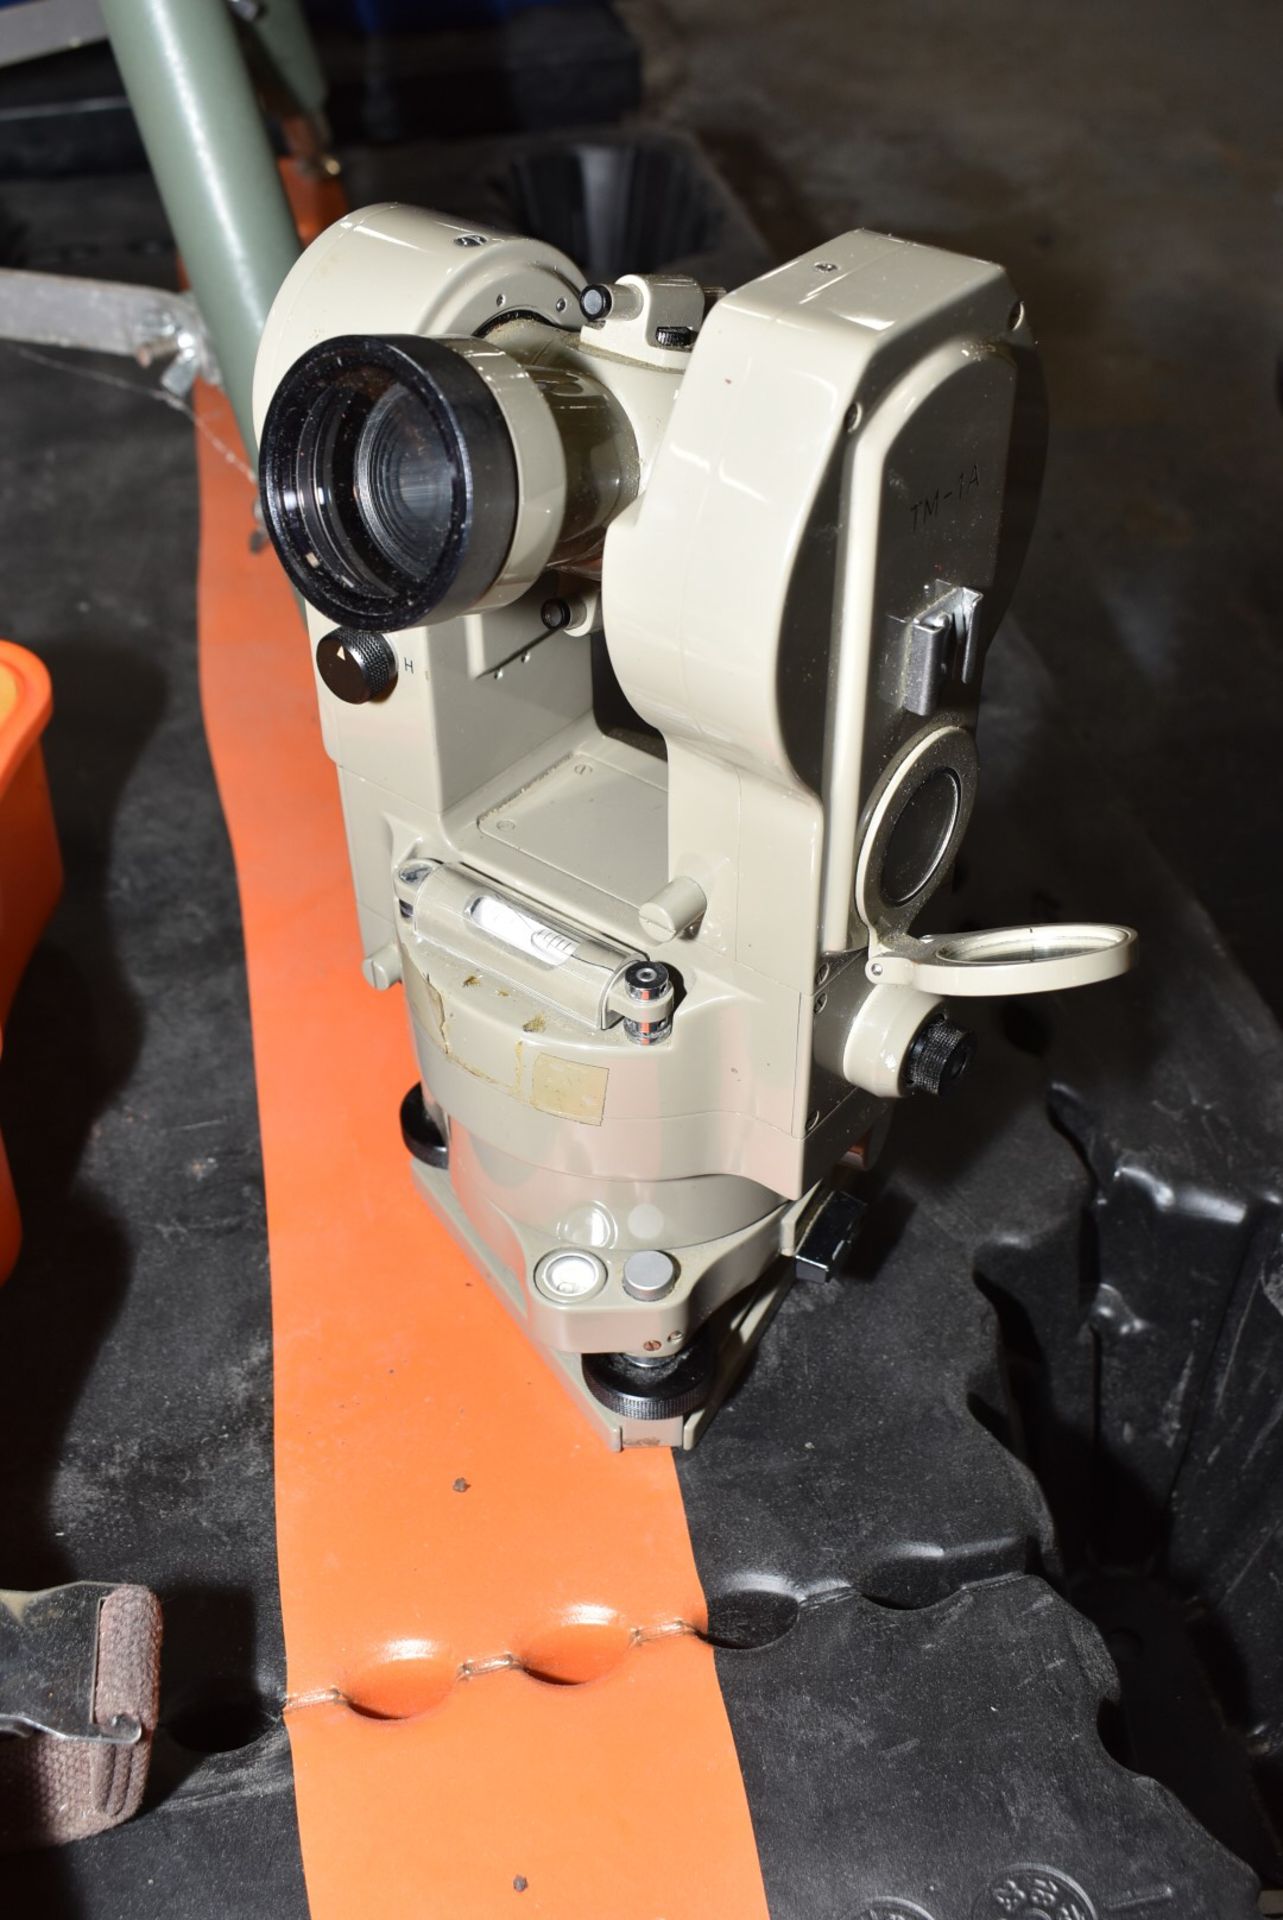 LIETZ THEODOLITE TM1A TELESCOPE TRANSIT WITH 30X MAGNIFICATION CAPACITY, 40MM OBJECTIVE APERTURE, - Image 3 of 8